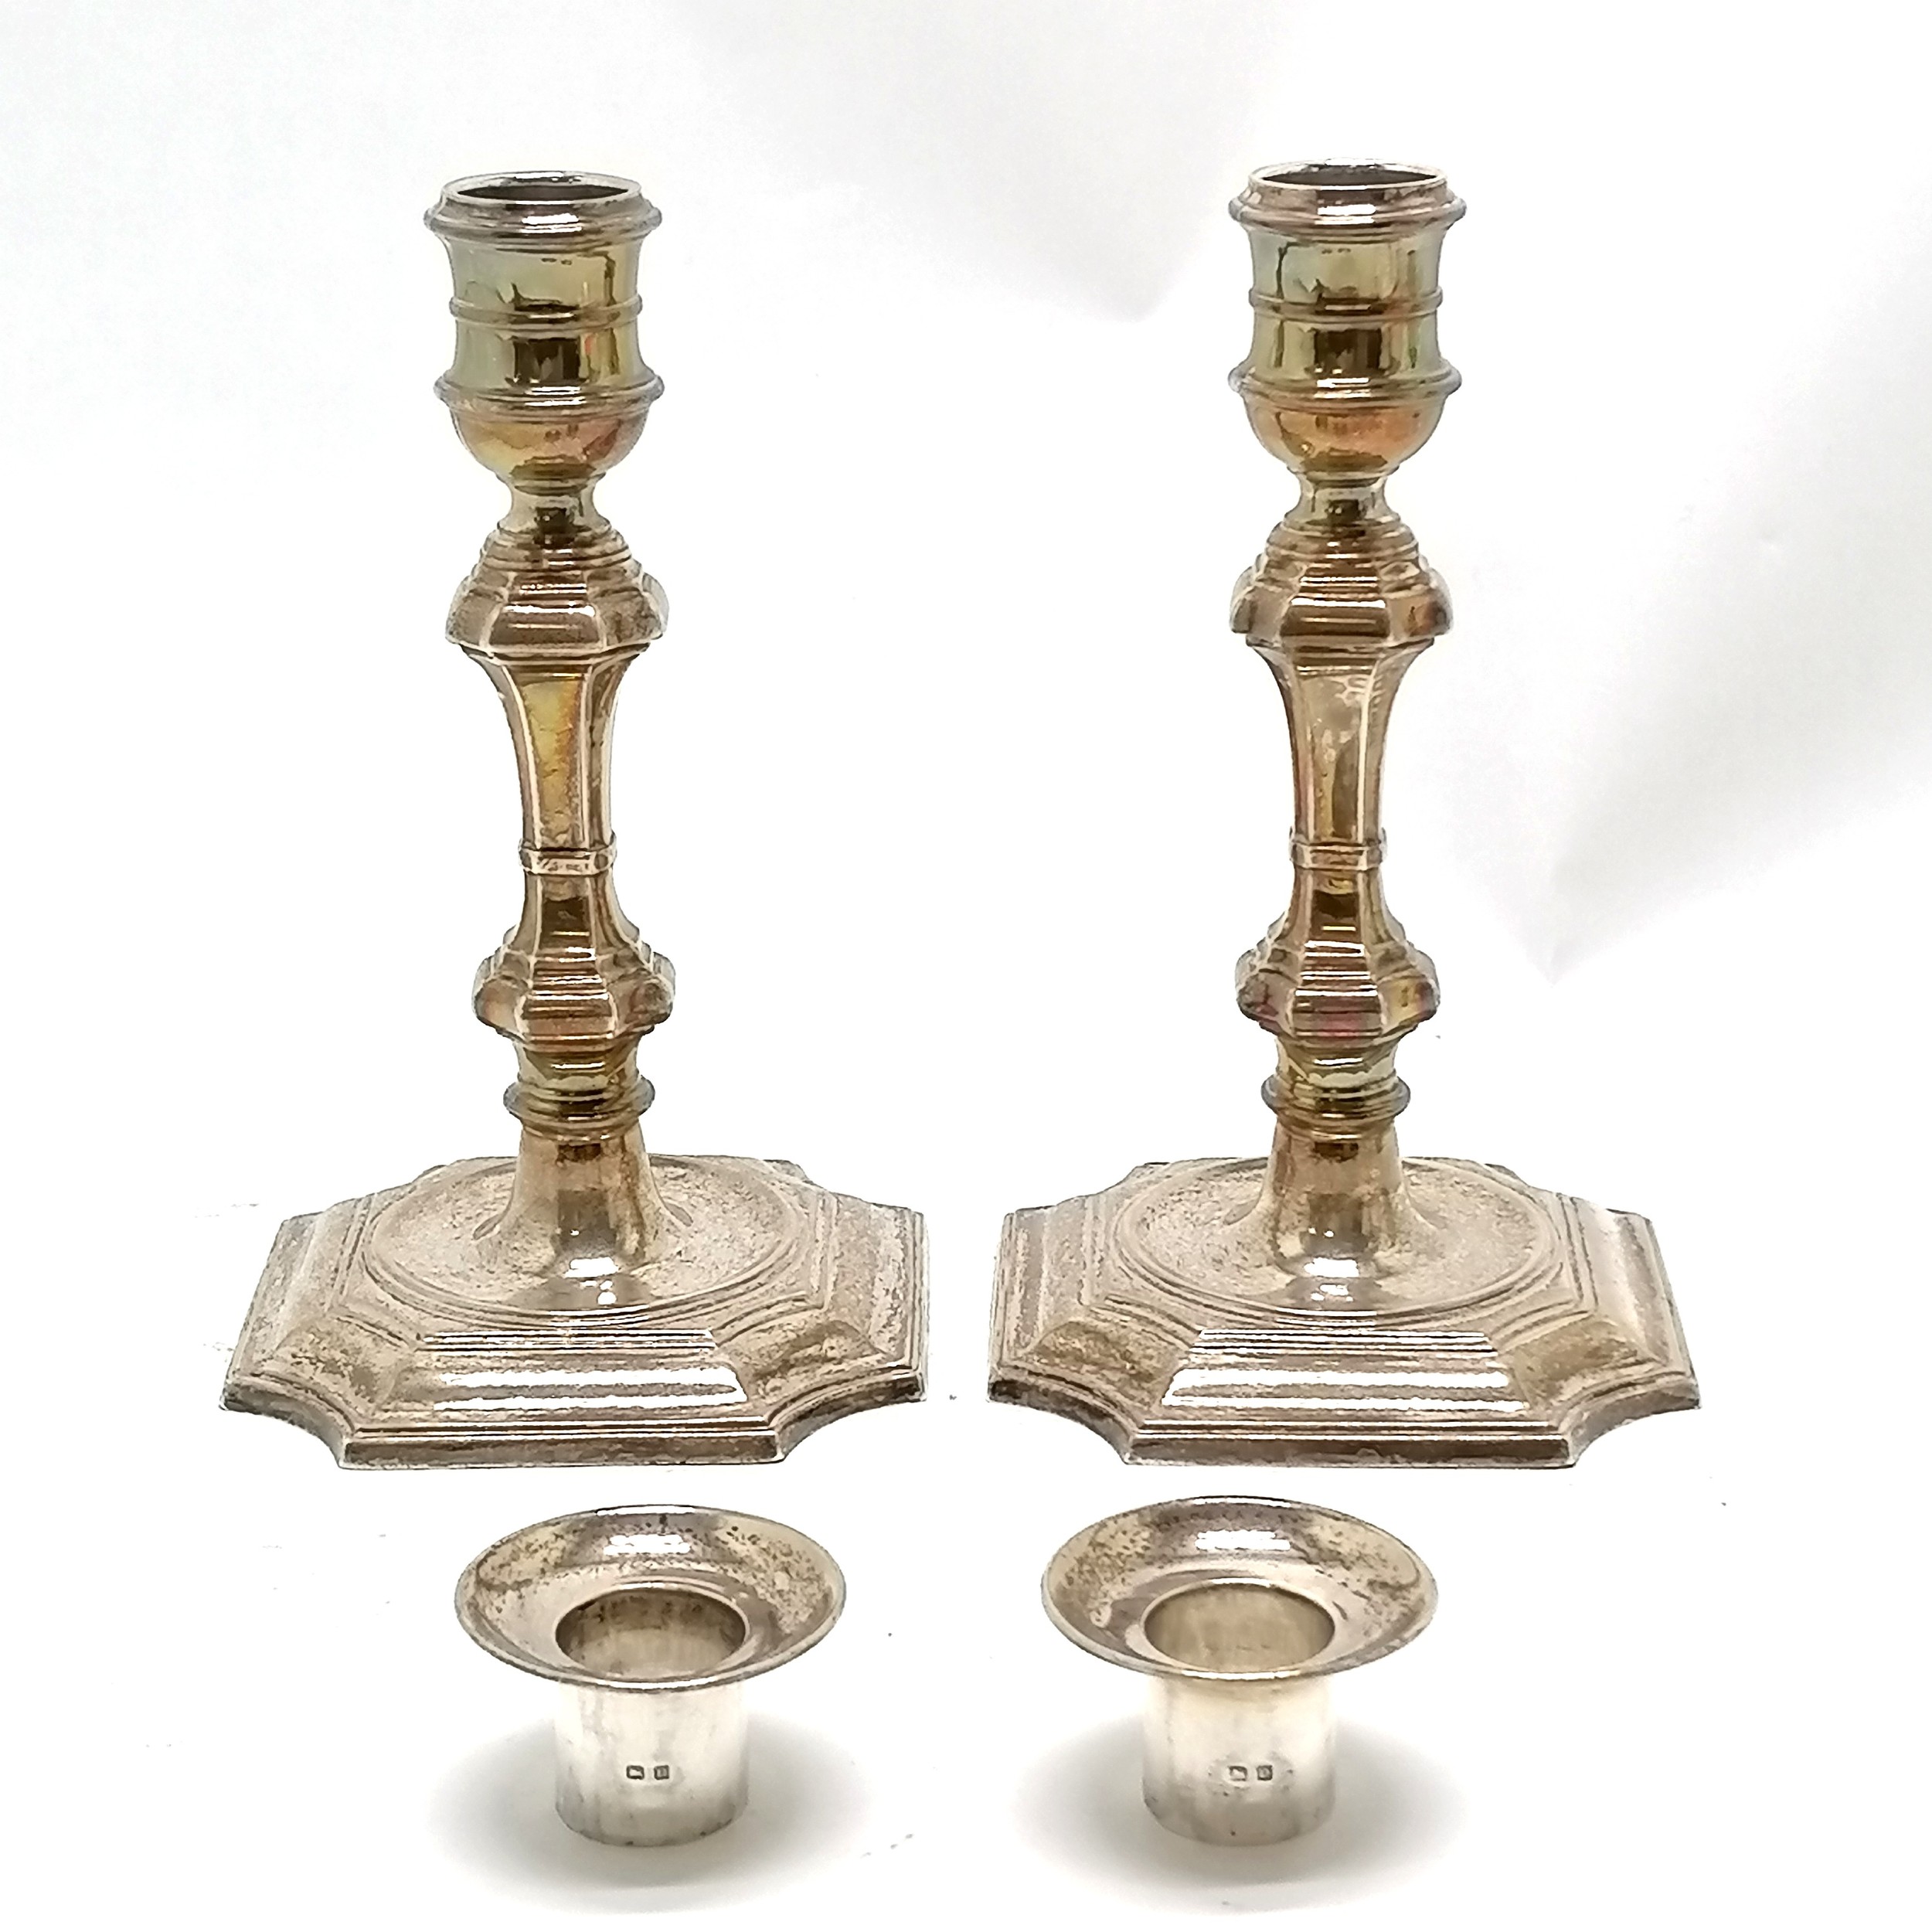 1928 silver pair of candlesticks with detachable sconces by Elkington & Co Ltd - 19.5cm high & total - Image 2 of 3